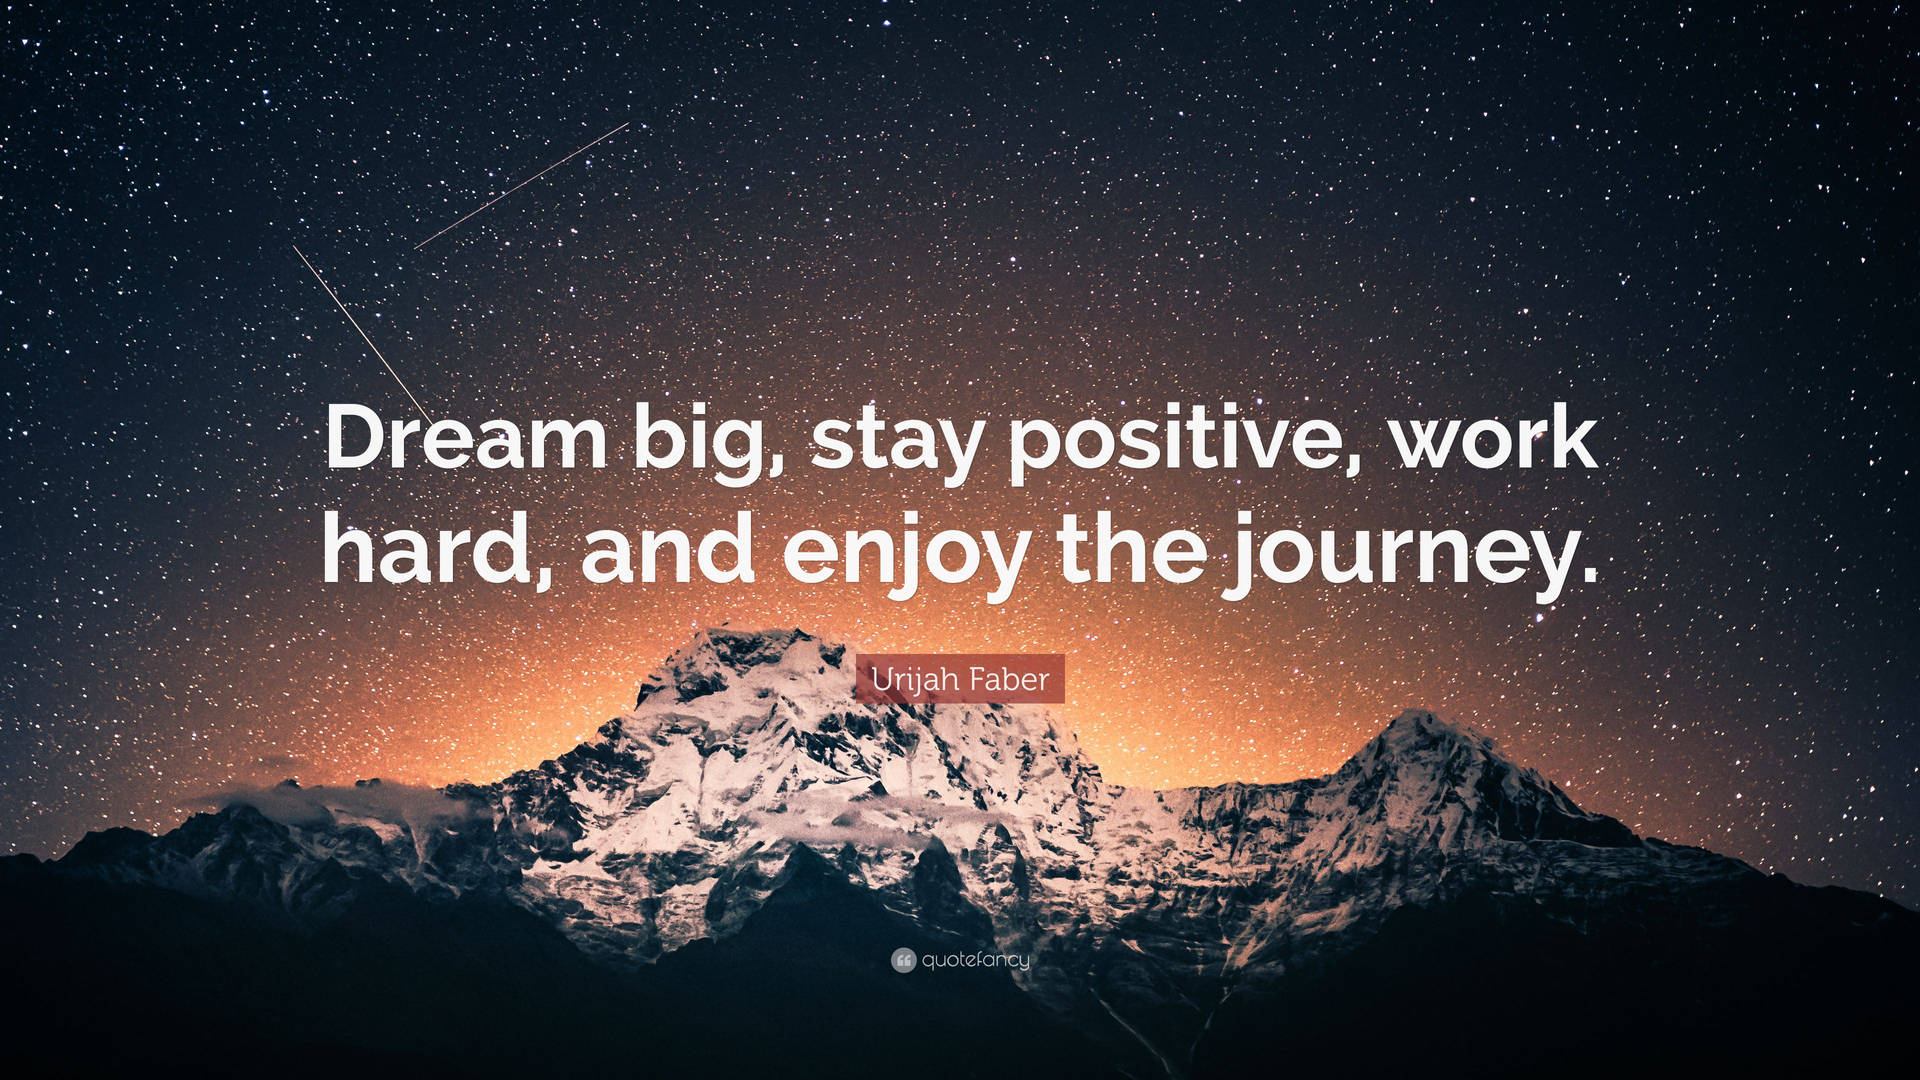 Working Dream Big Quotes Wallpaper